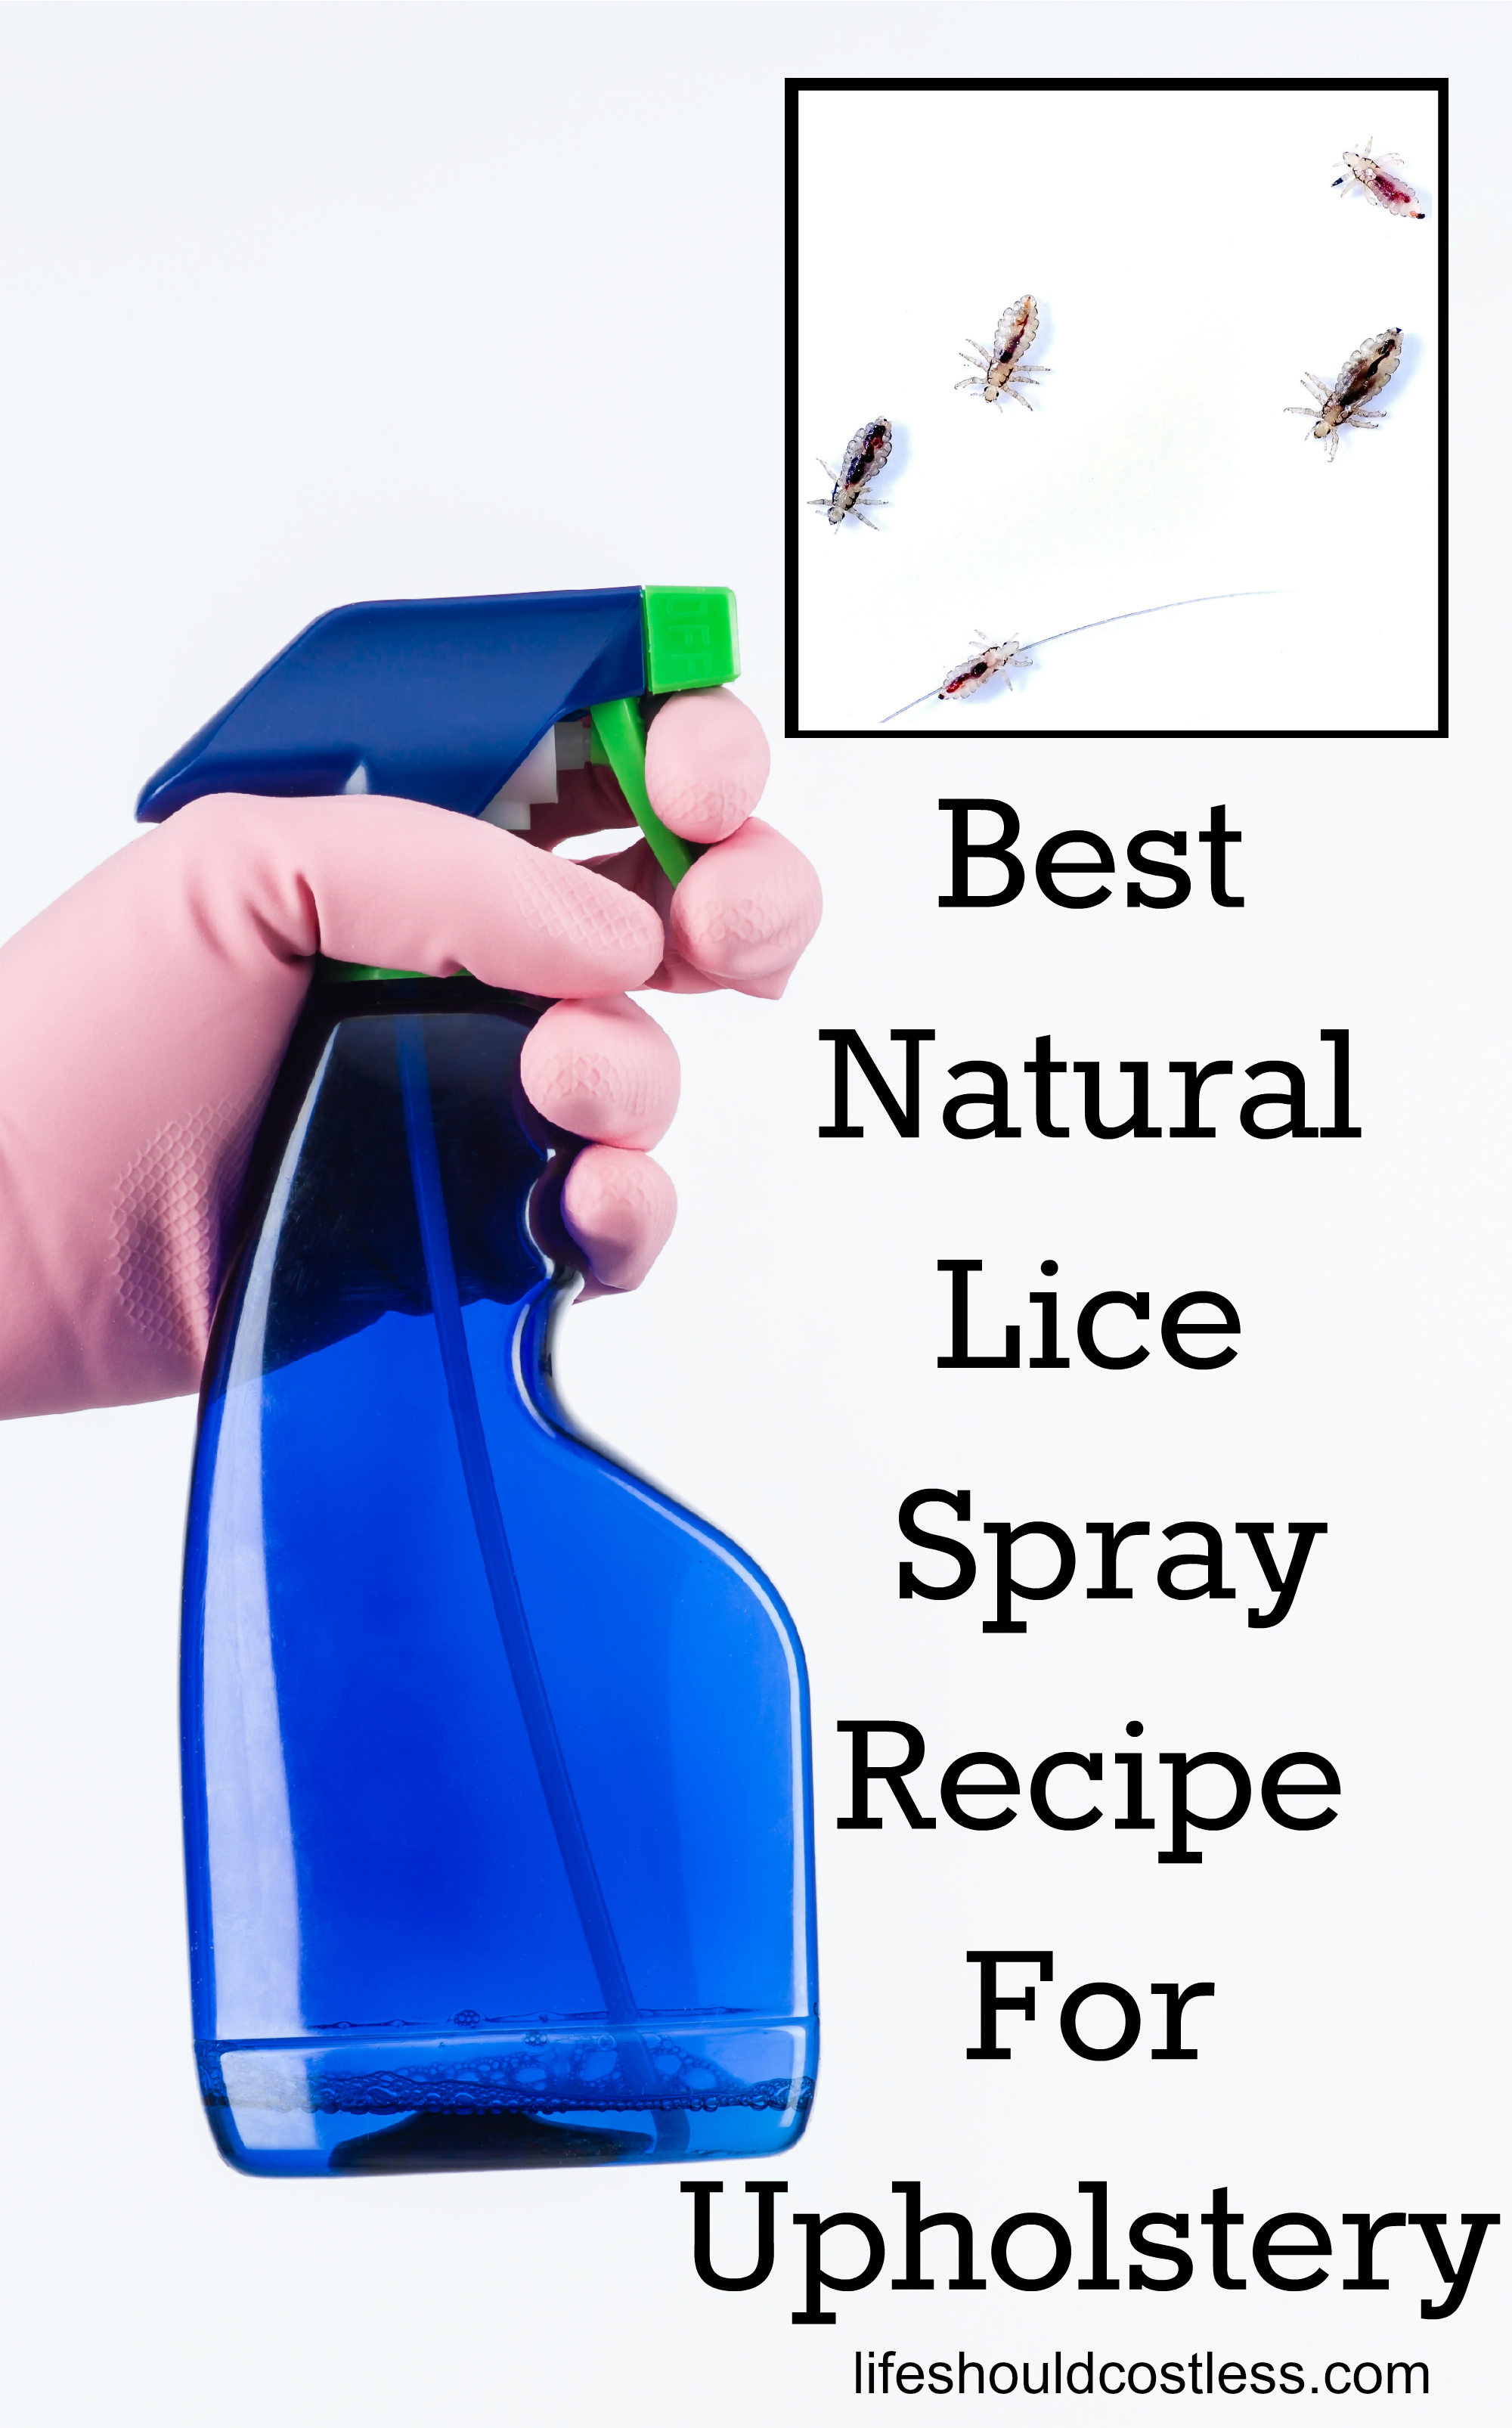 Best Head Lice Treatment Spray Recipe For Upholstery (couches, beds, carpet, plush toys, furniture, car interior)